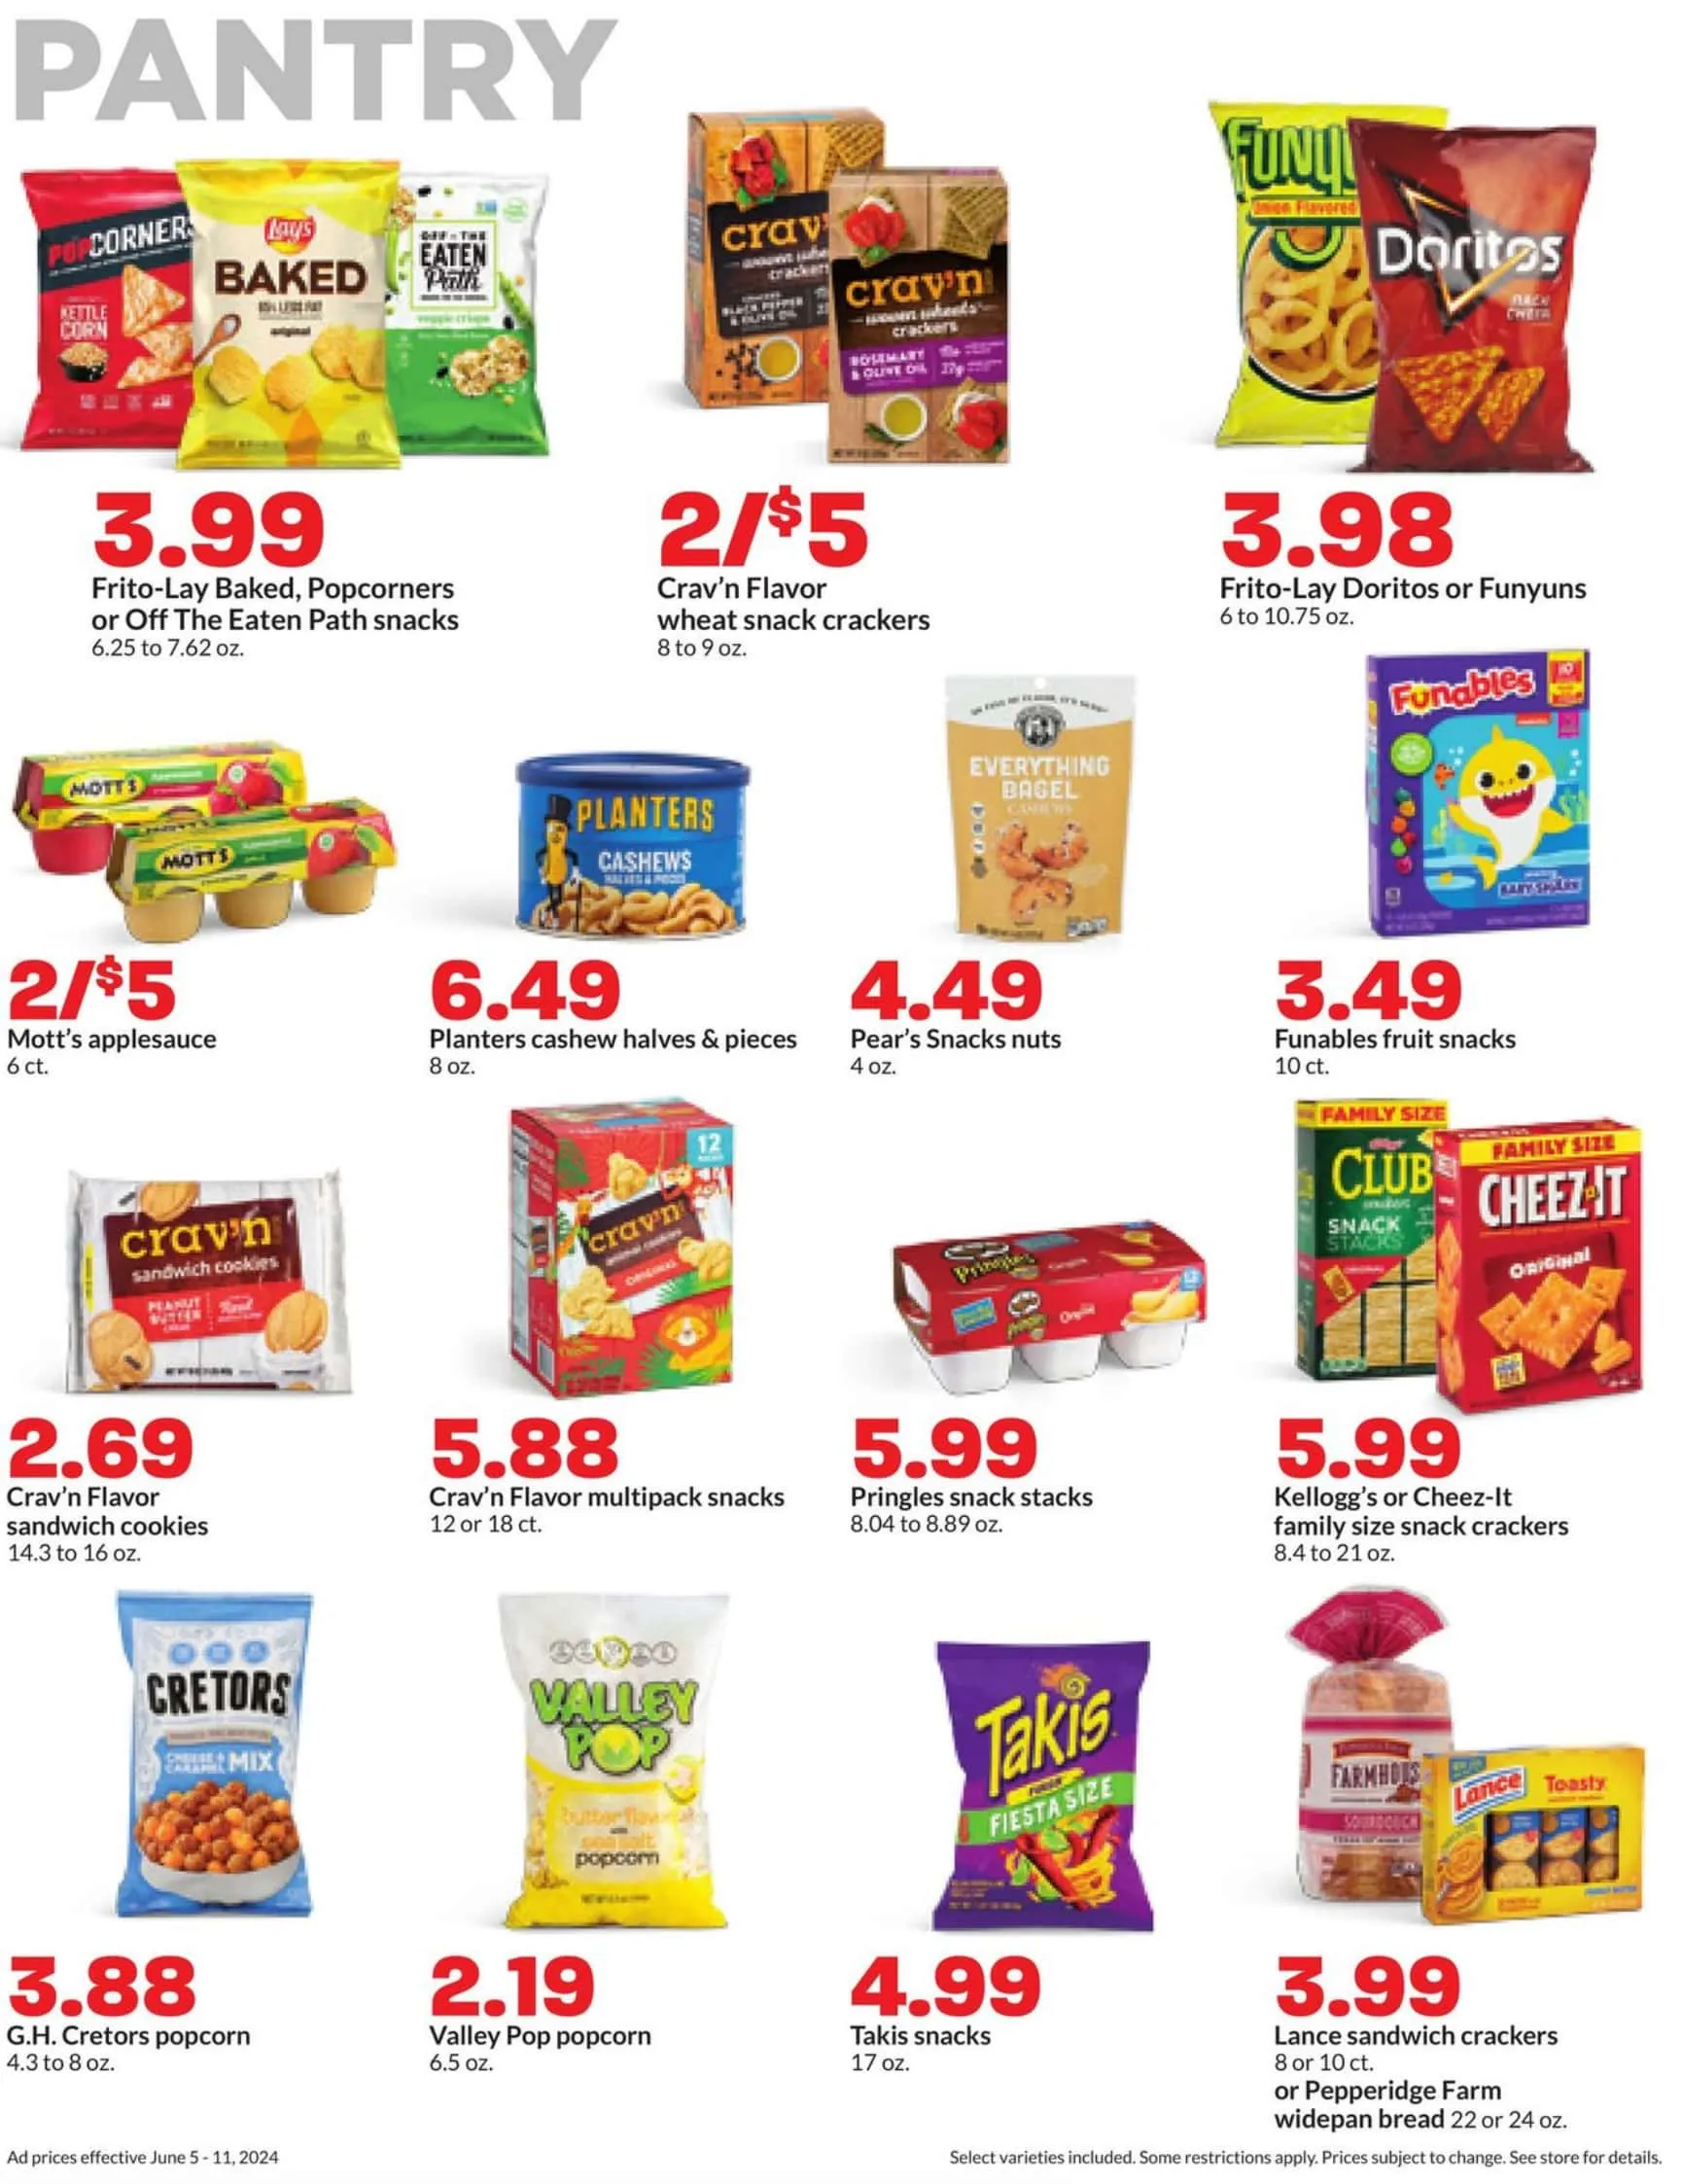 Hy-Vee July 2024 Weekly Sales, Deals, Discounts and Digital Coupons.